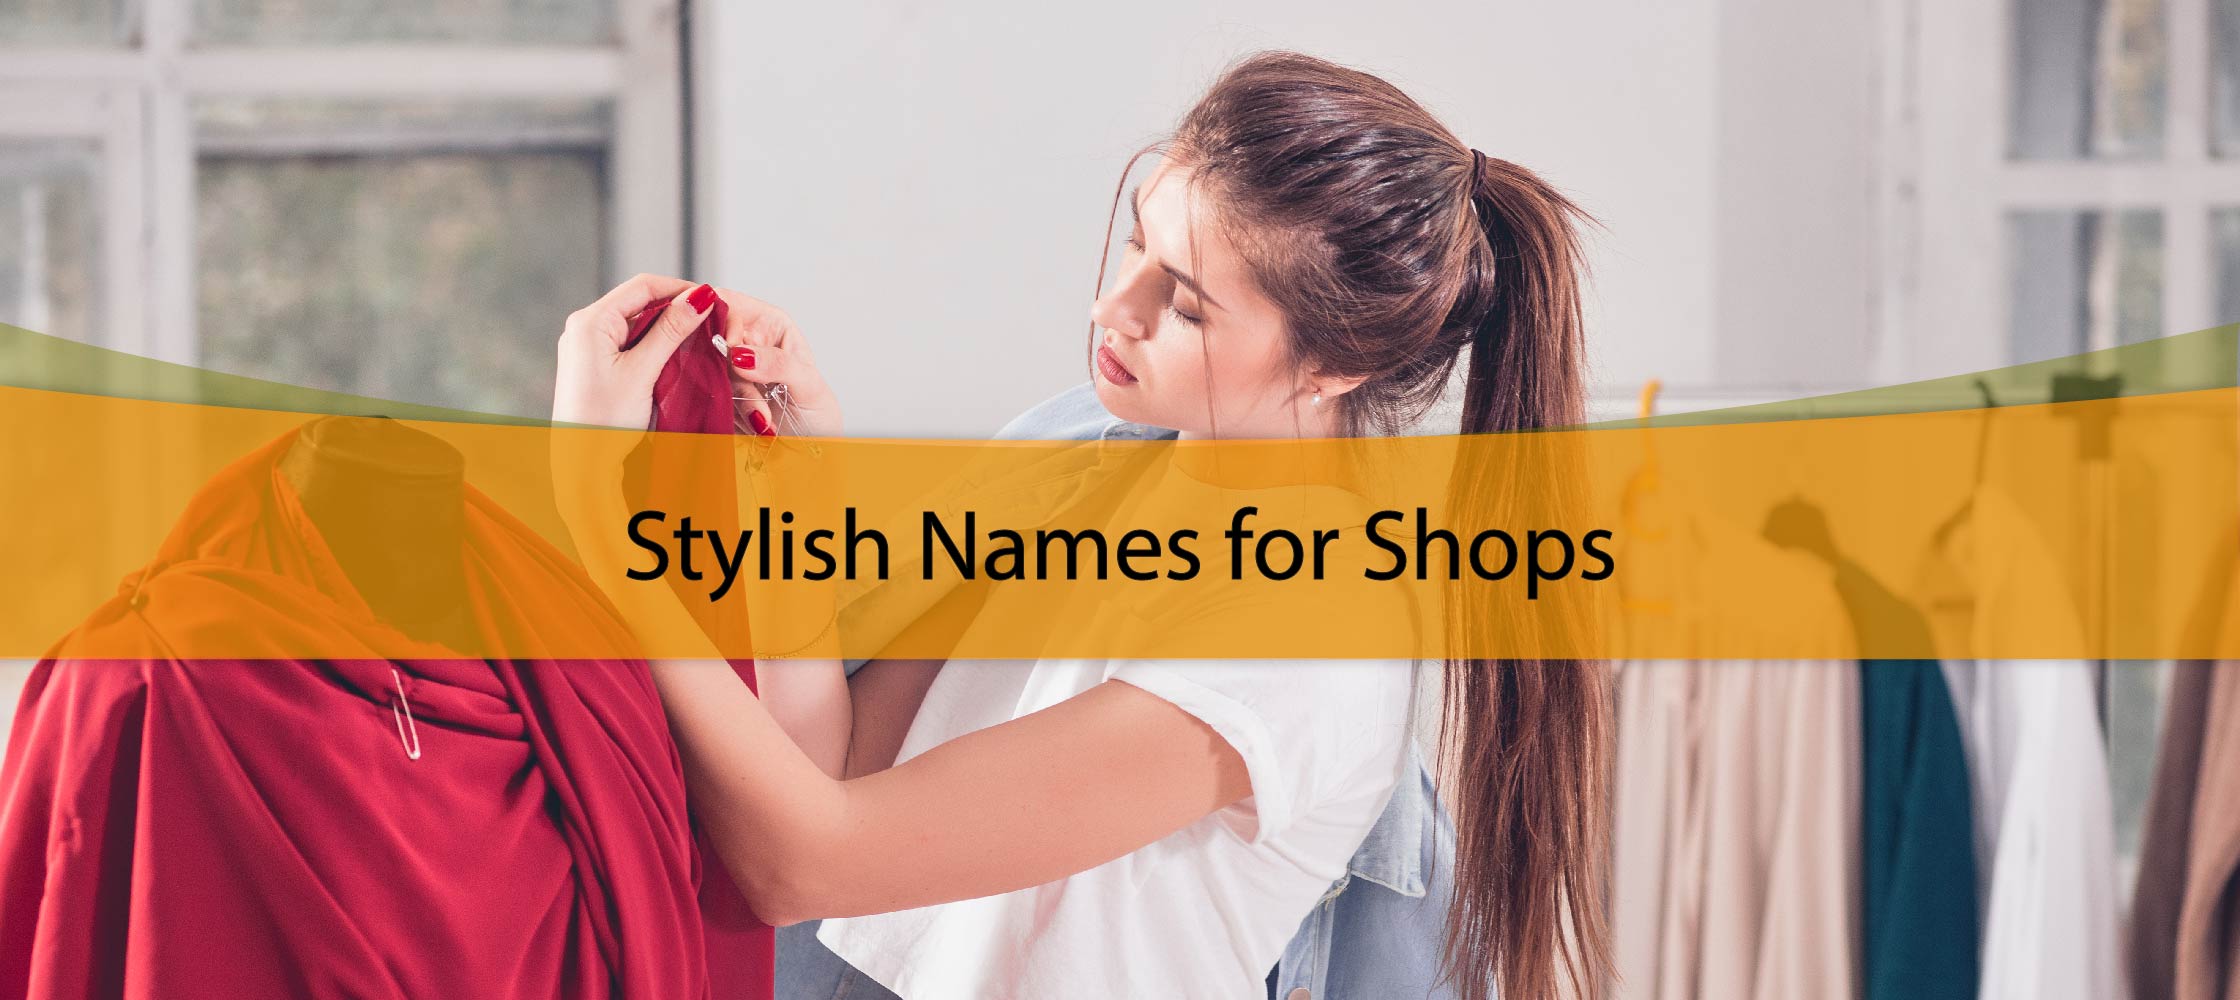 Stylish Names for Shops